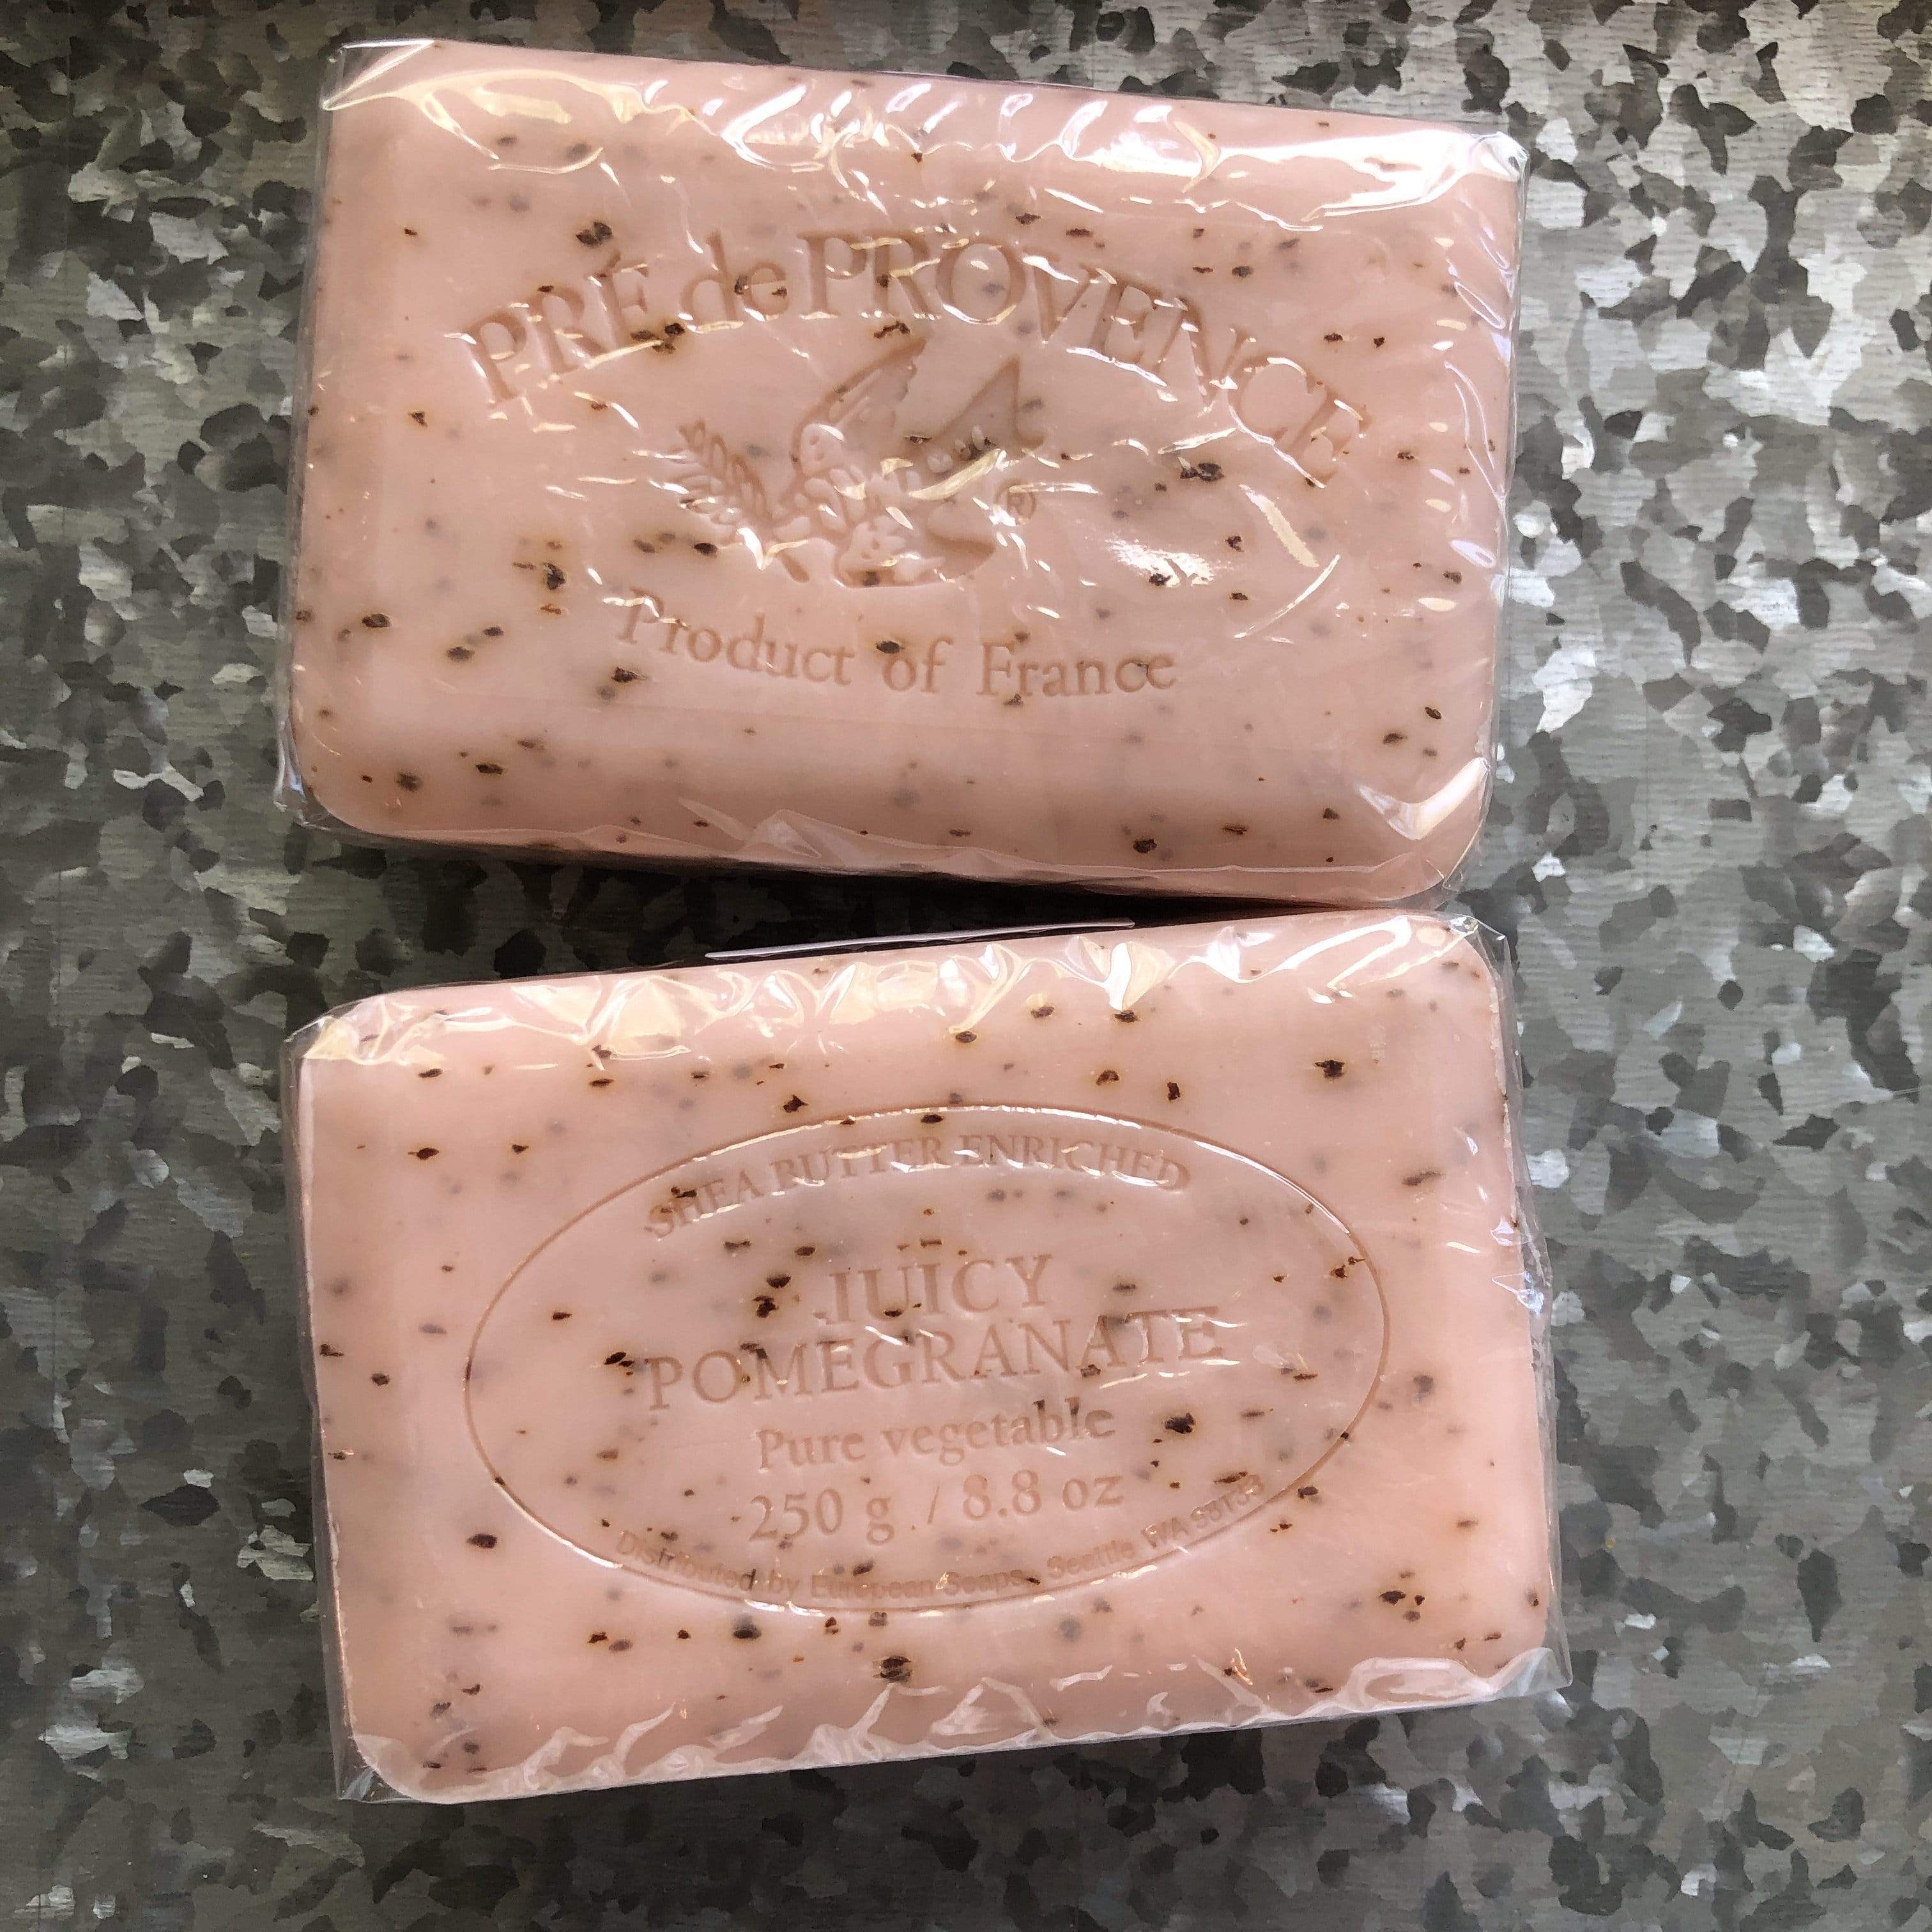 Juicy Pomegranate French Milled Soap - 250g - PORCH